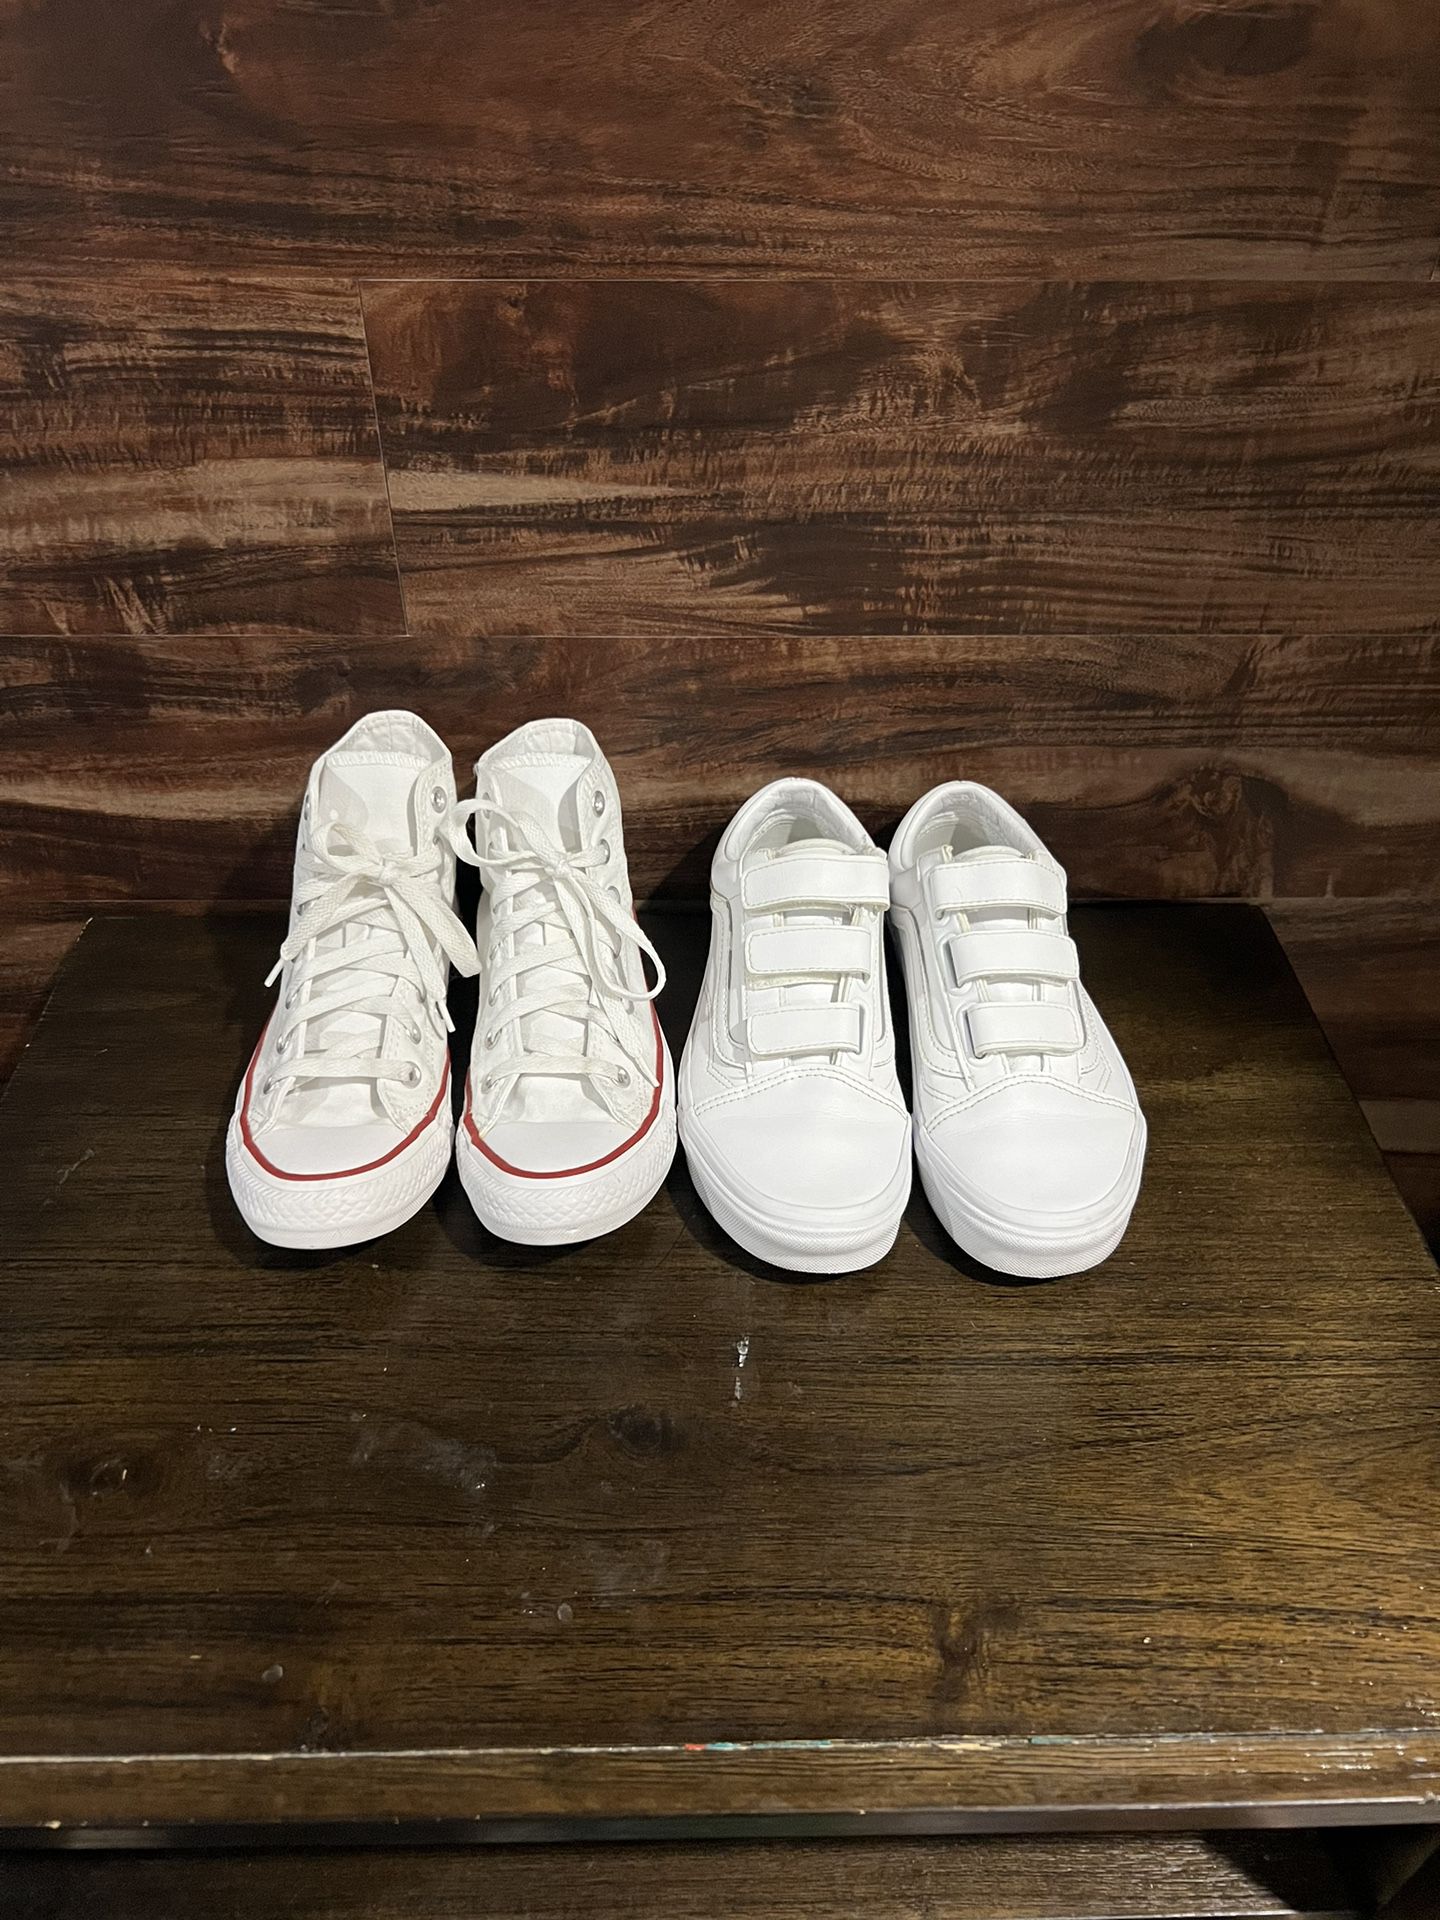 Converse and Vans $25 for both 